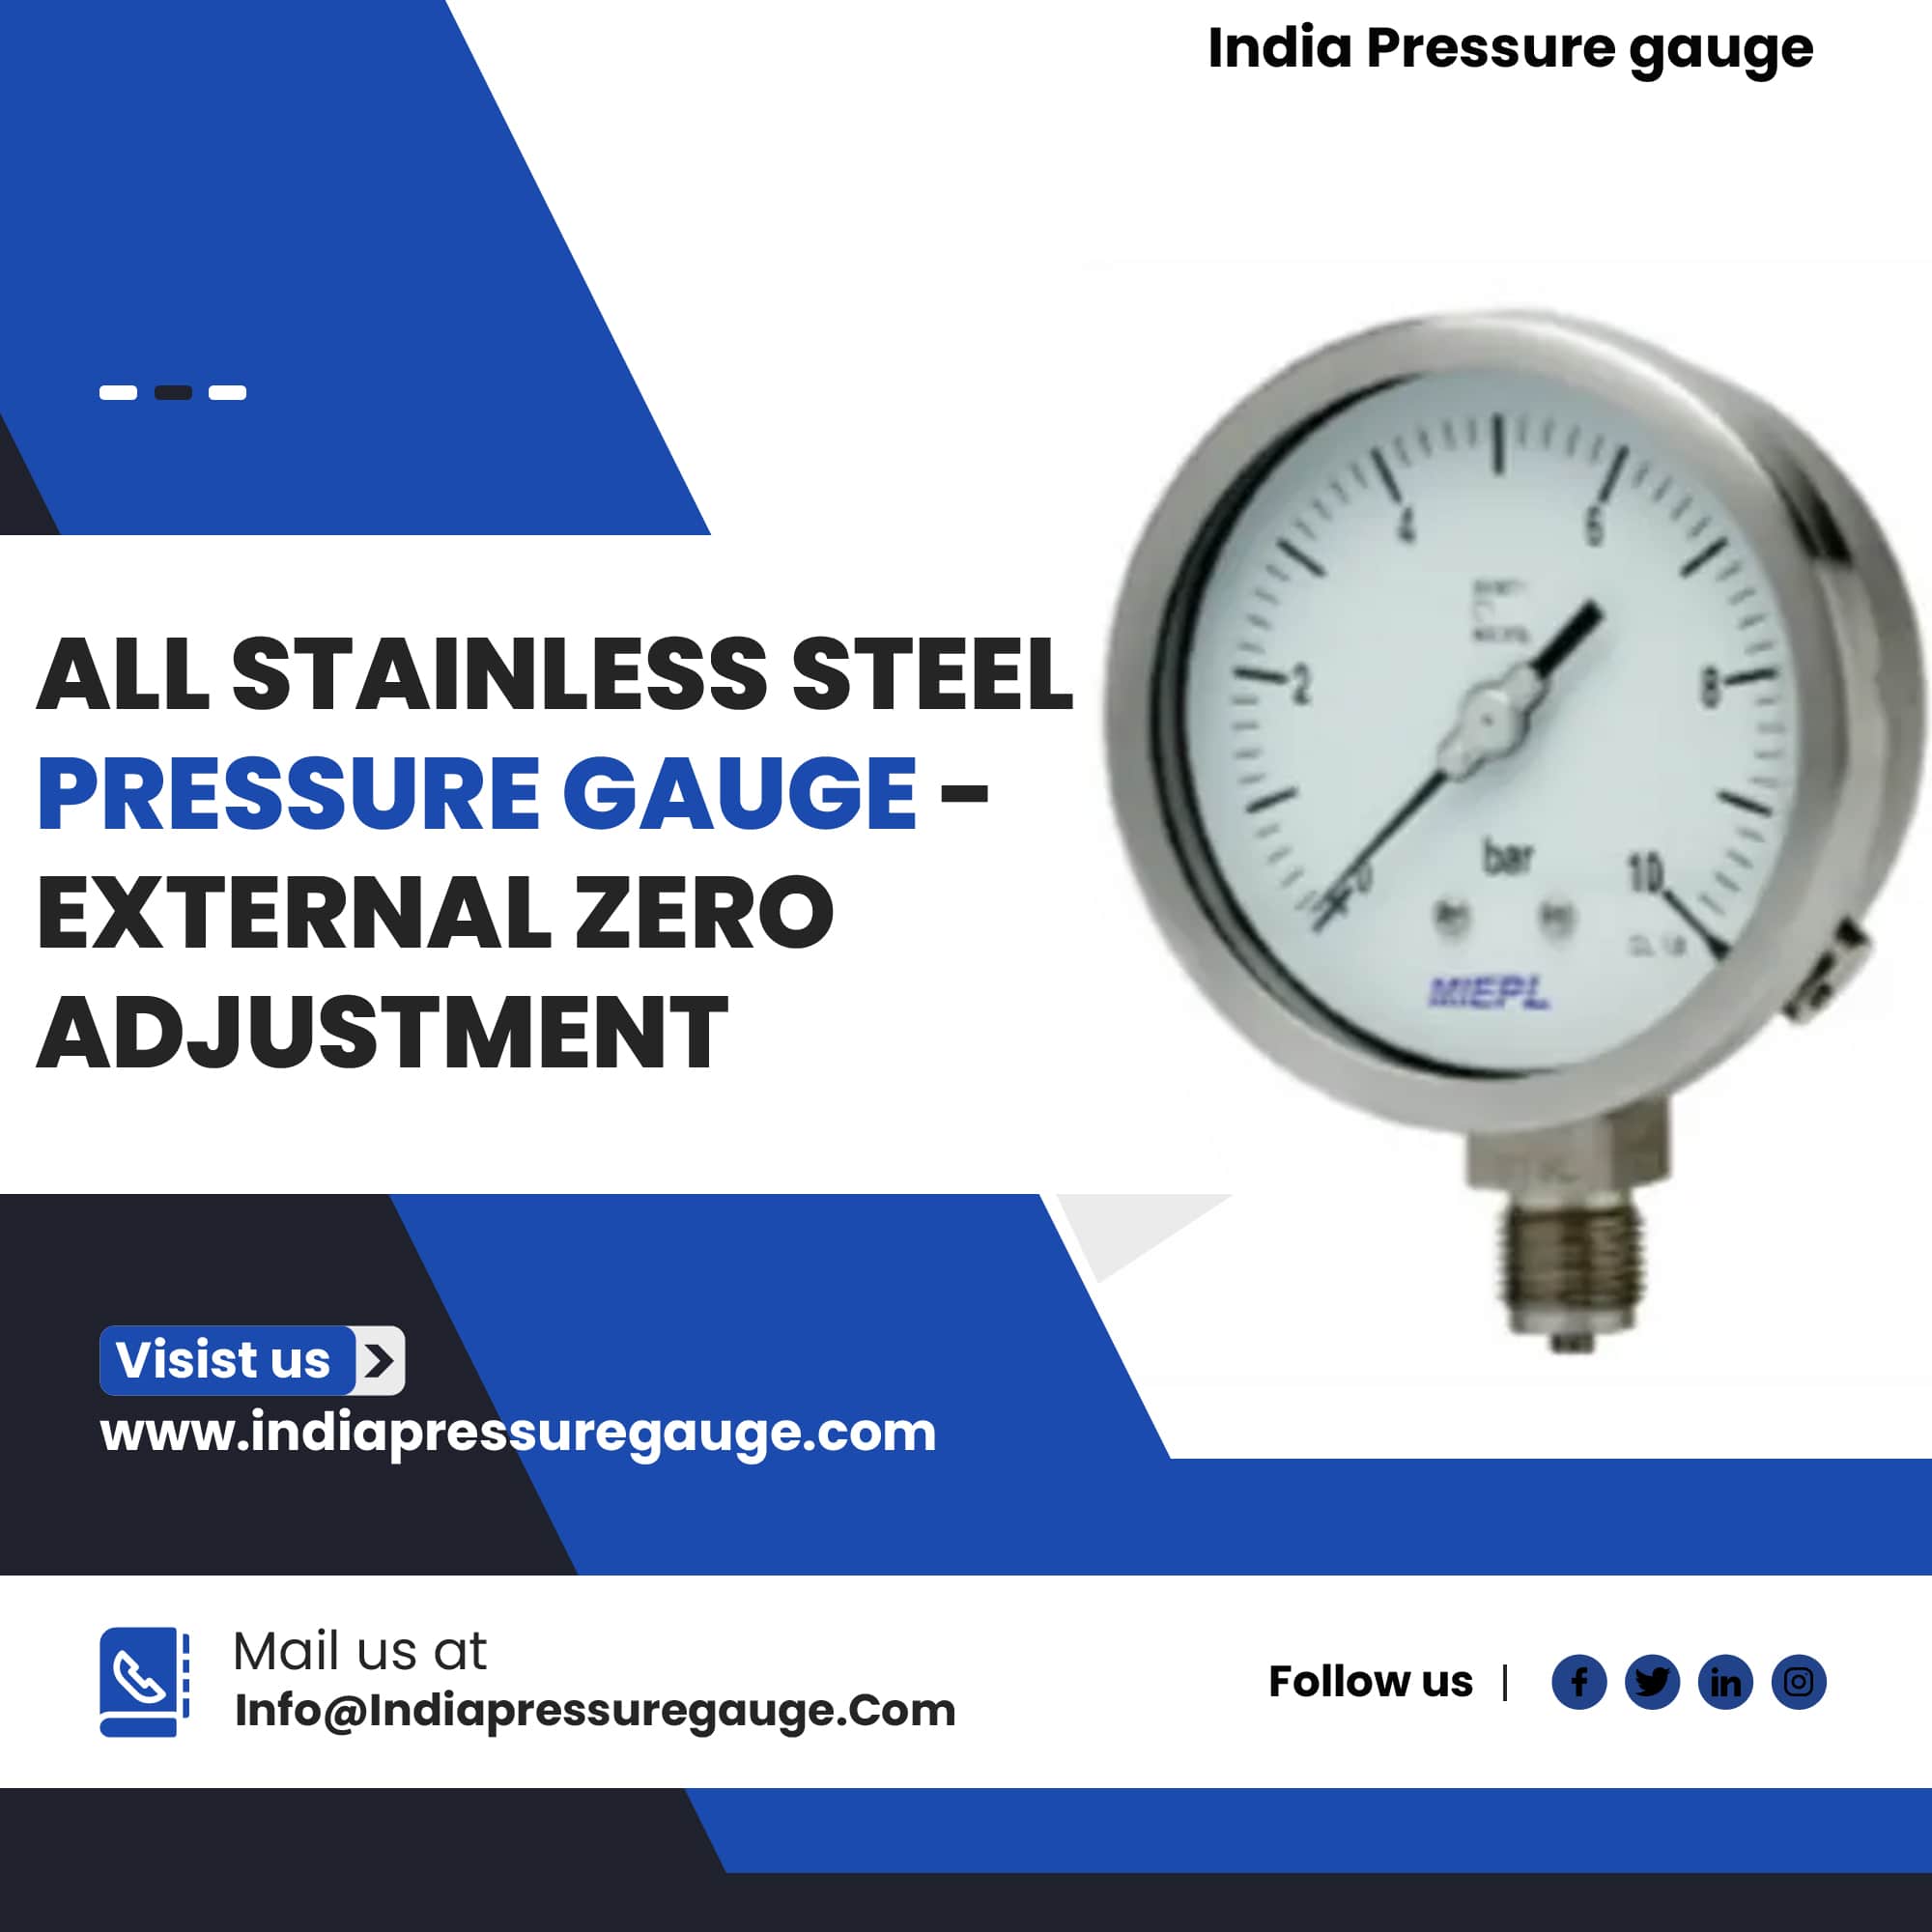 All Stainless Steel Pressure Gauge - External Zero Adjustment | India Pressure GaugeBuy and SellElectronic ItemsAll Indiaother